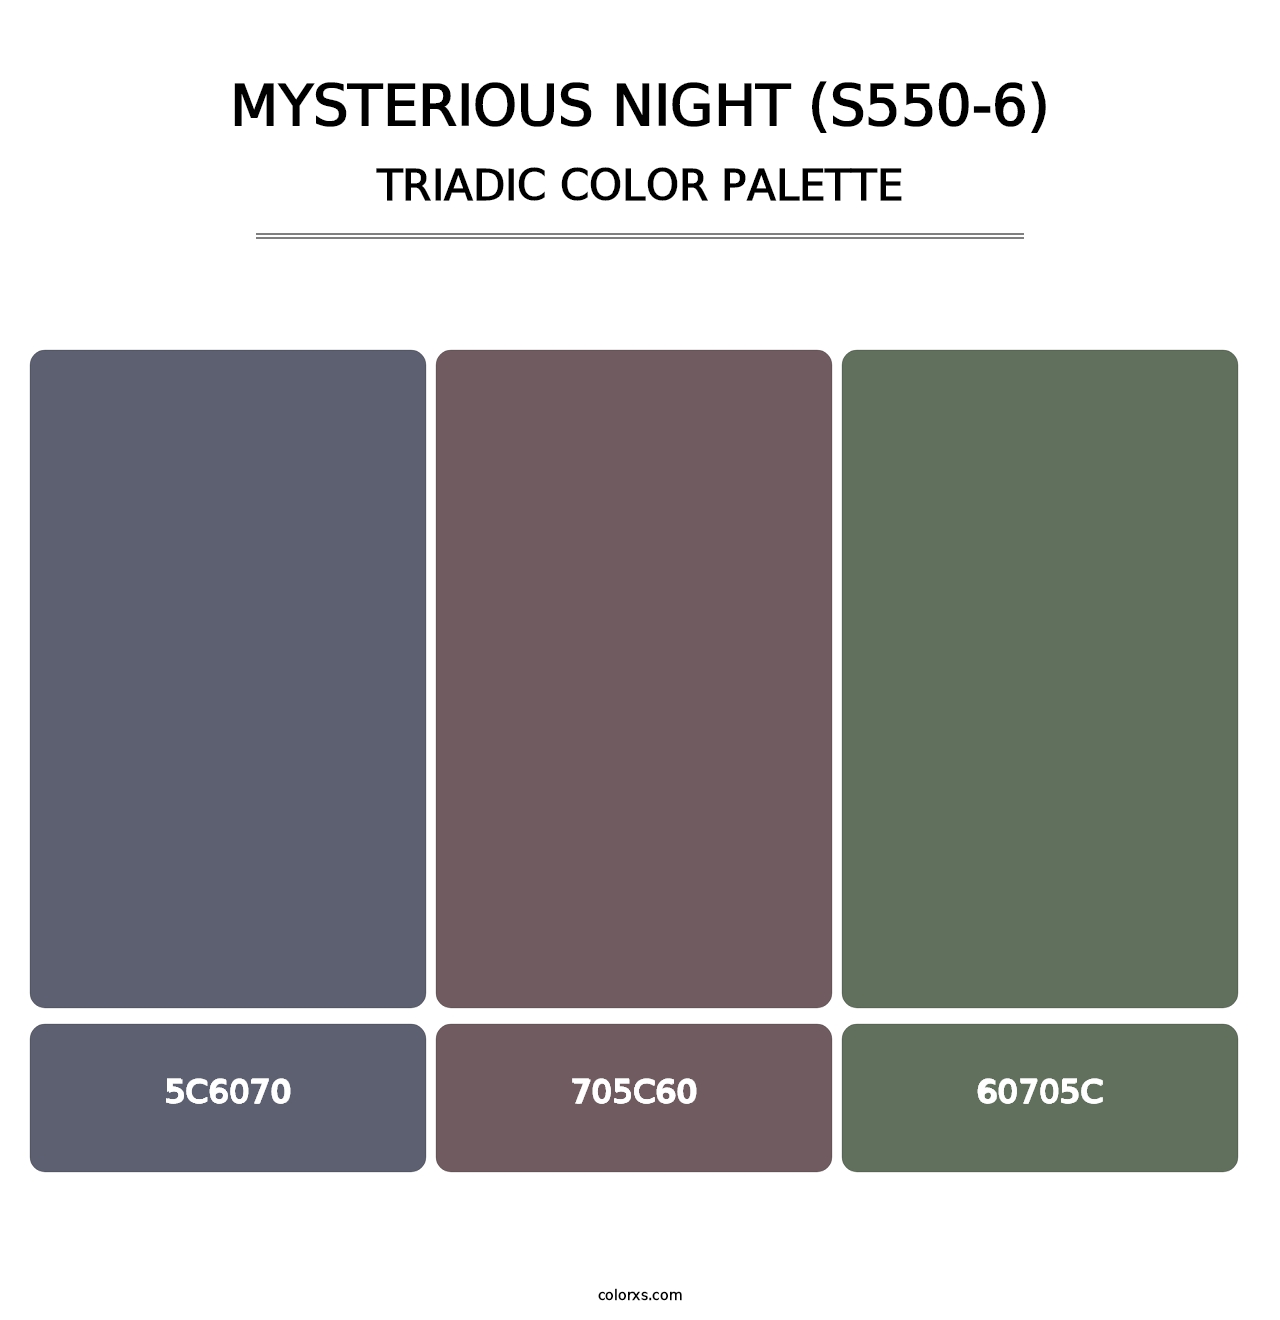 Mysterious Night (S550-6) - Triadic Color Palette